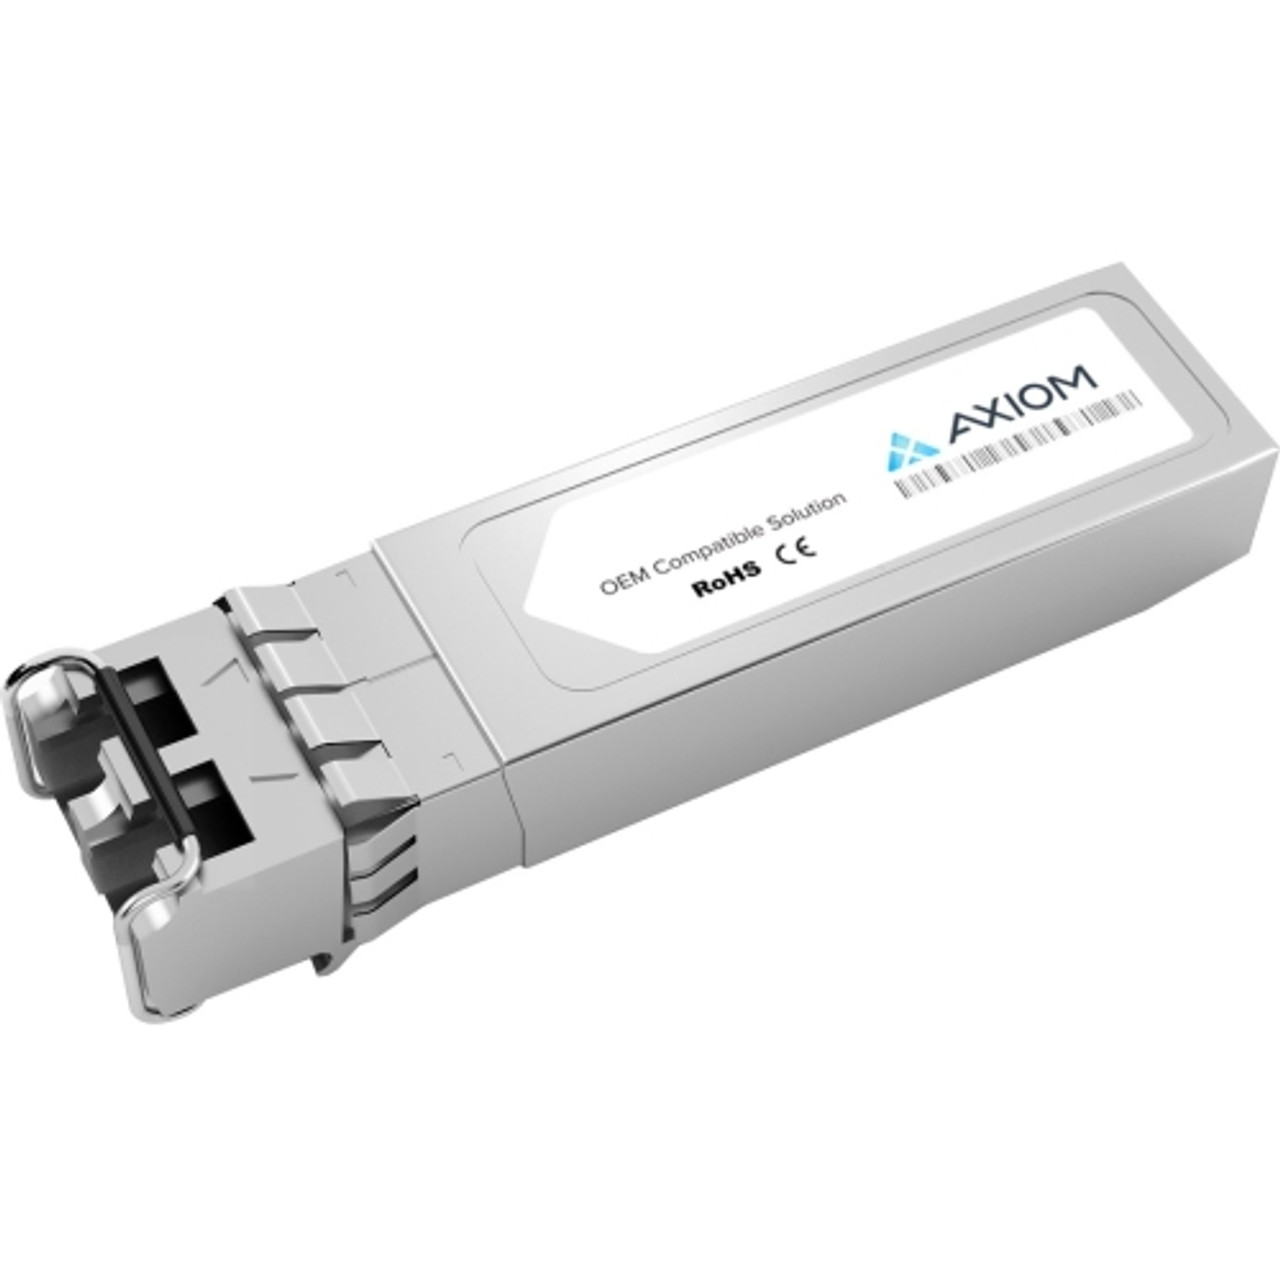 320-0841-AX Axiom 8Gbps 8GBase-SW Multi-mode Fiber 300m 850nm LC Connector SFP+ Transceiver Module for Dell Compatible